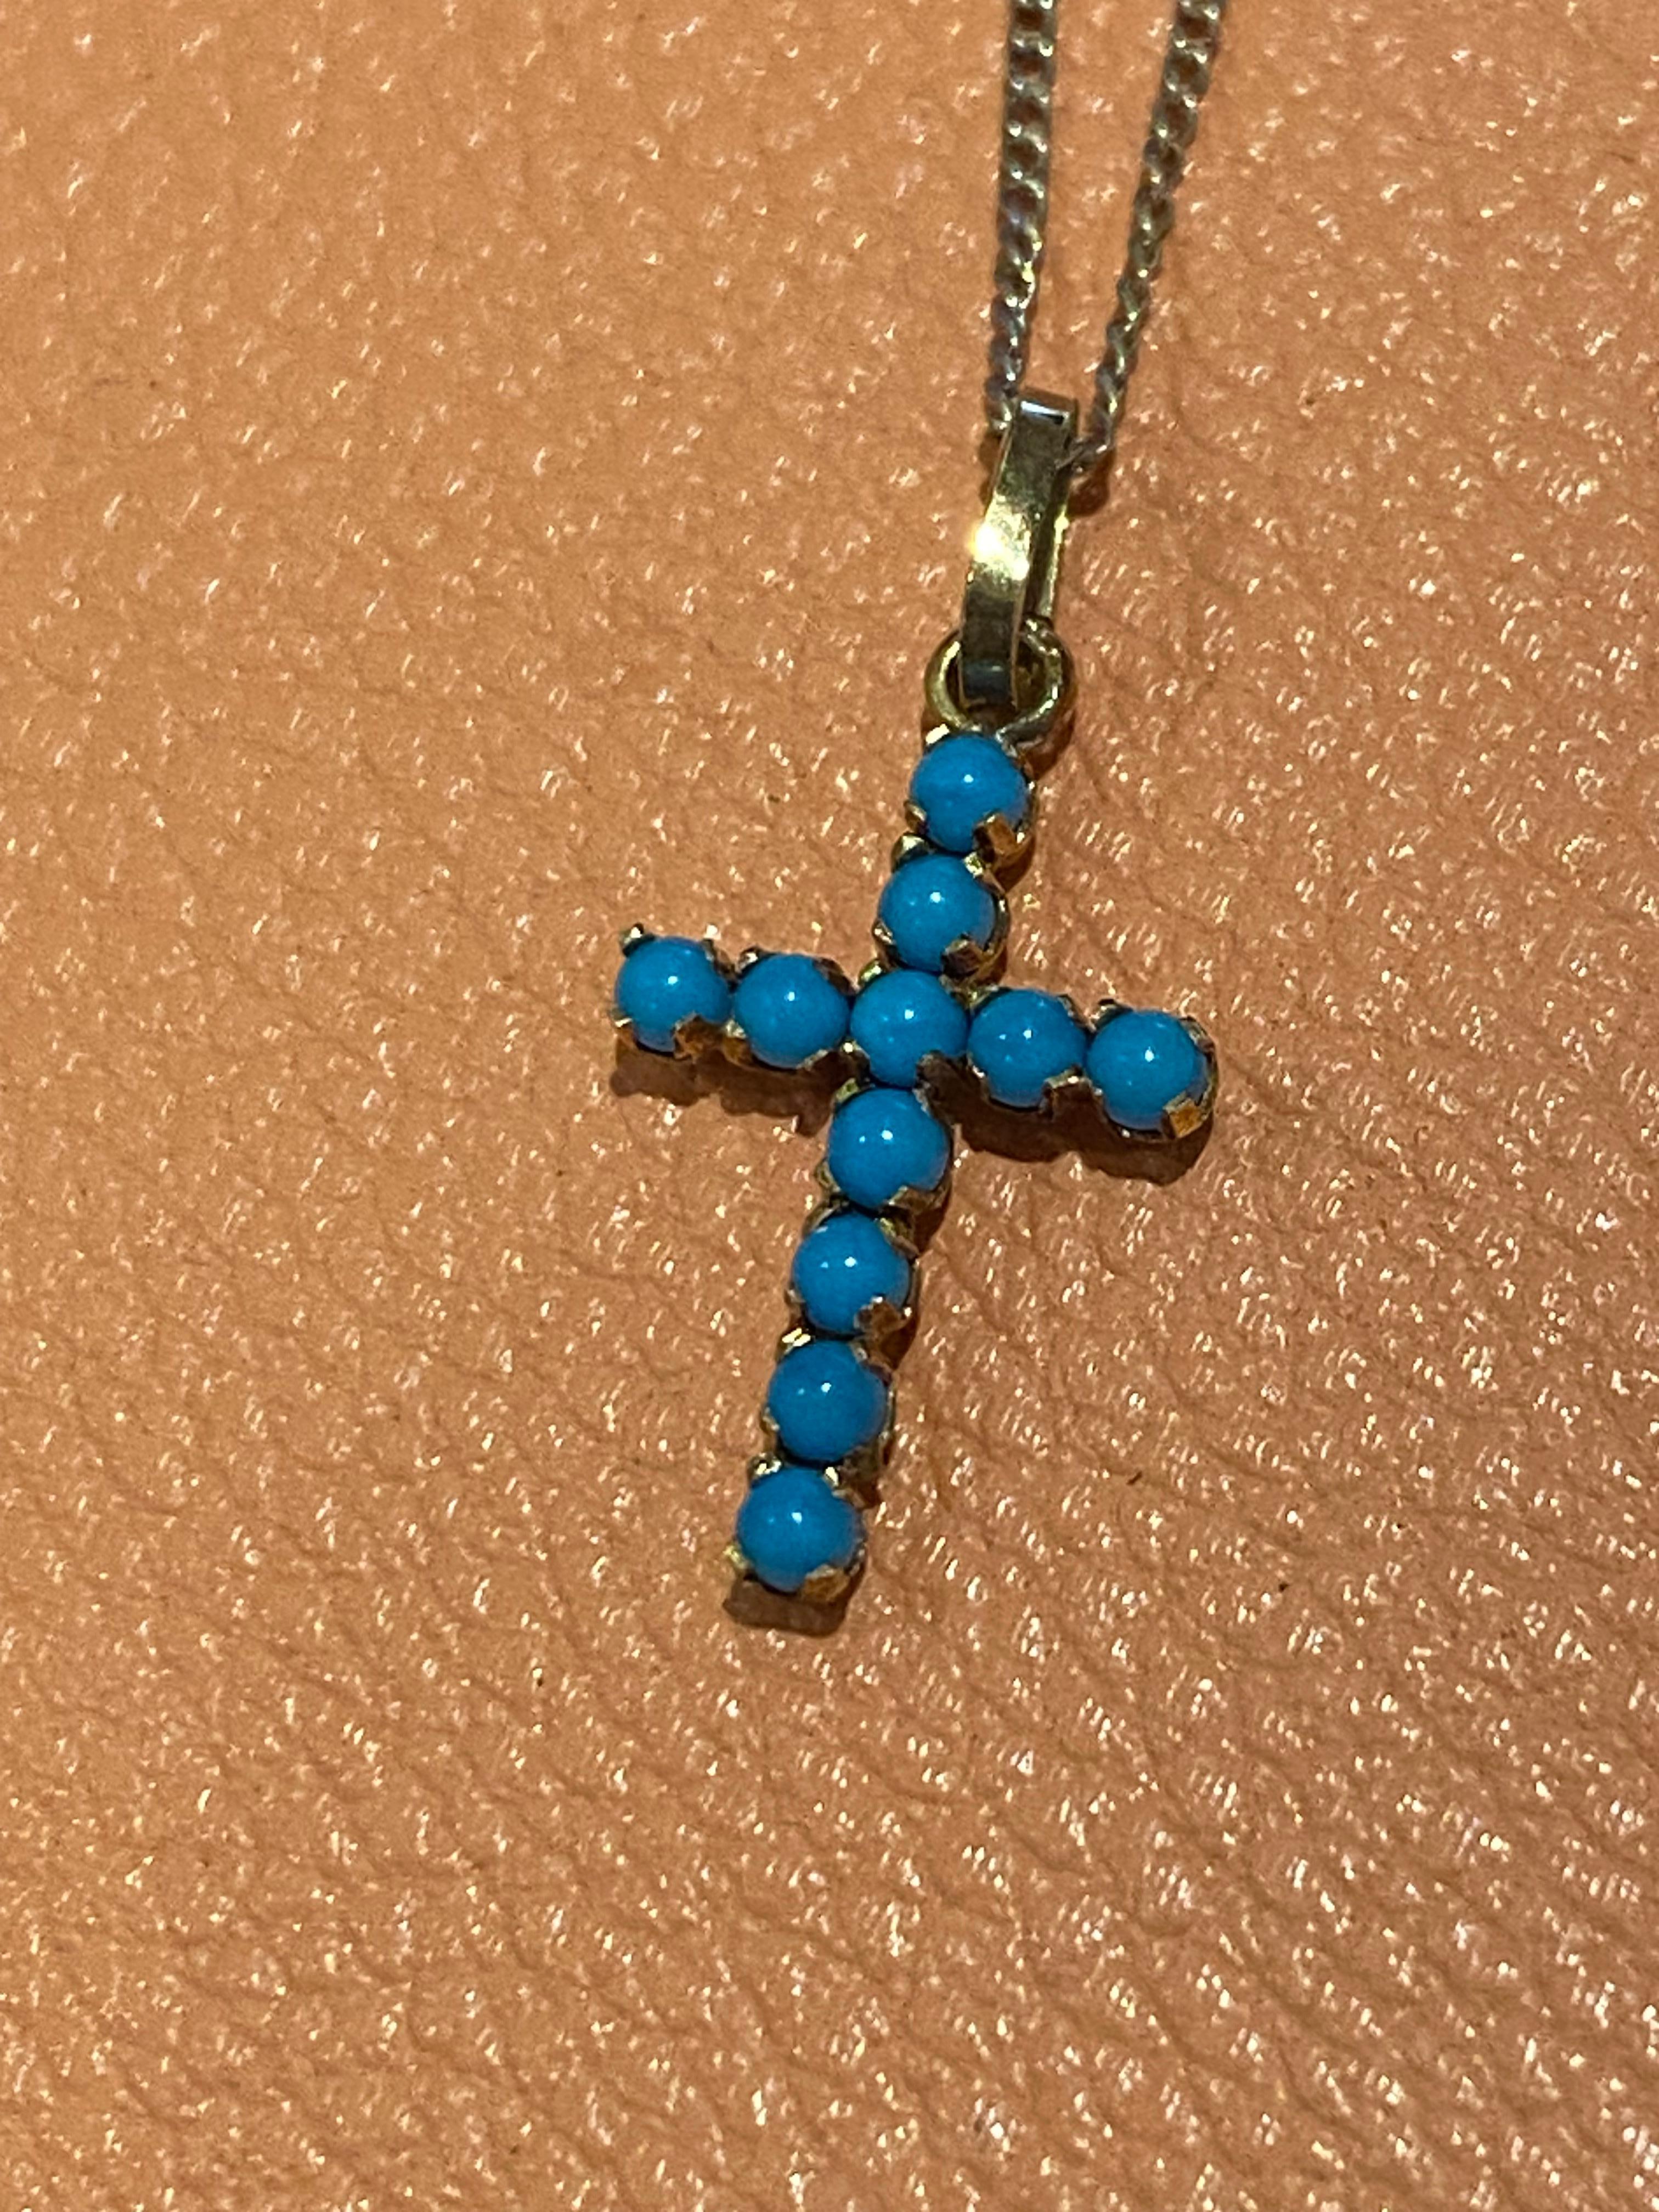 Add a vintage charm to your collection with this 9K yellow gold cross pendant,
set with 11 natural turquoises of gorgeous & distinctive sky blue colour

On a matching sterling silver chain,
completed by spring ring clasp 

Pendant is measuring 23mm